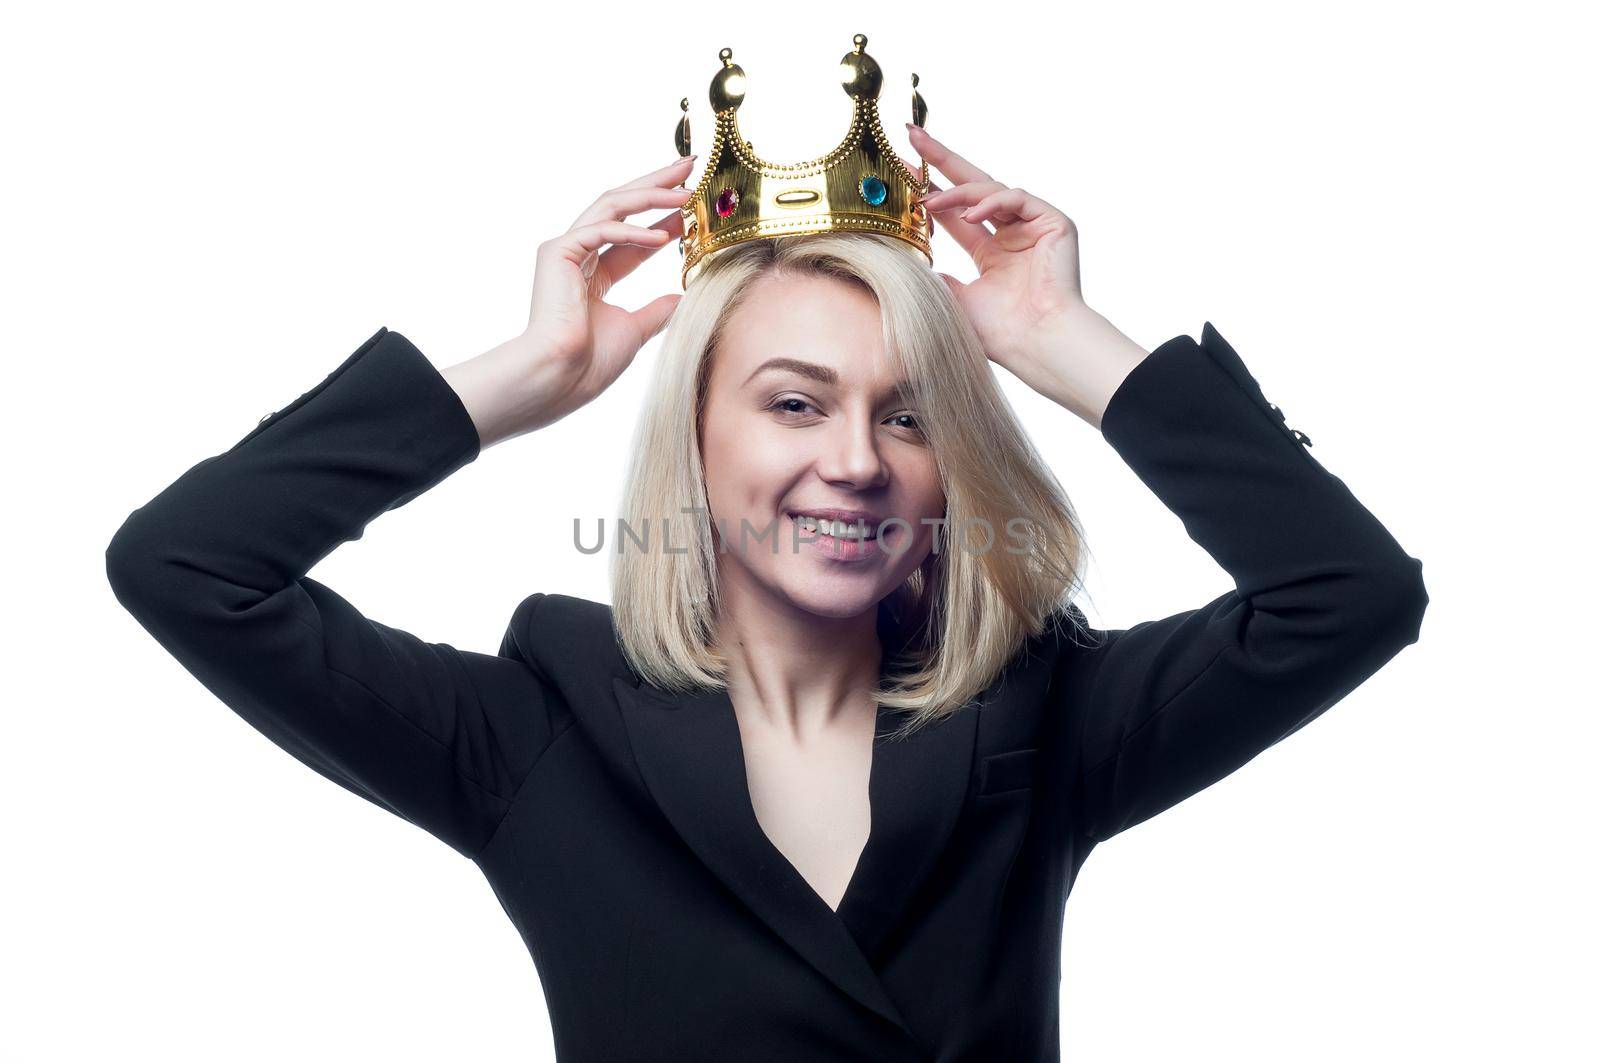 Blond girl with crown on head on white background by Evgenii_Leontev